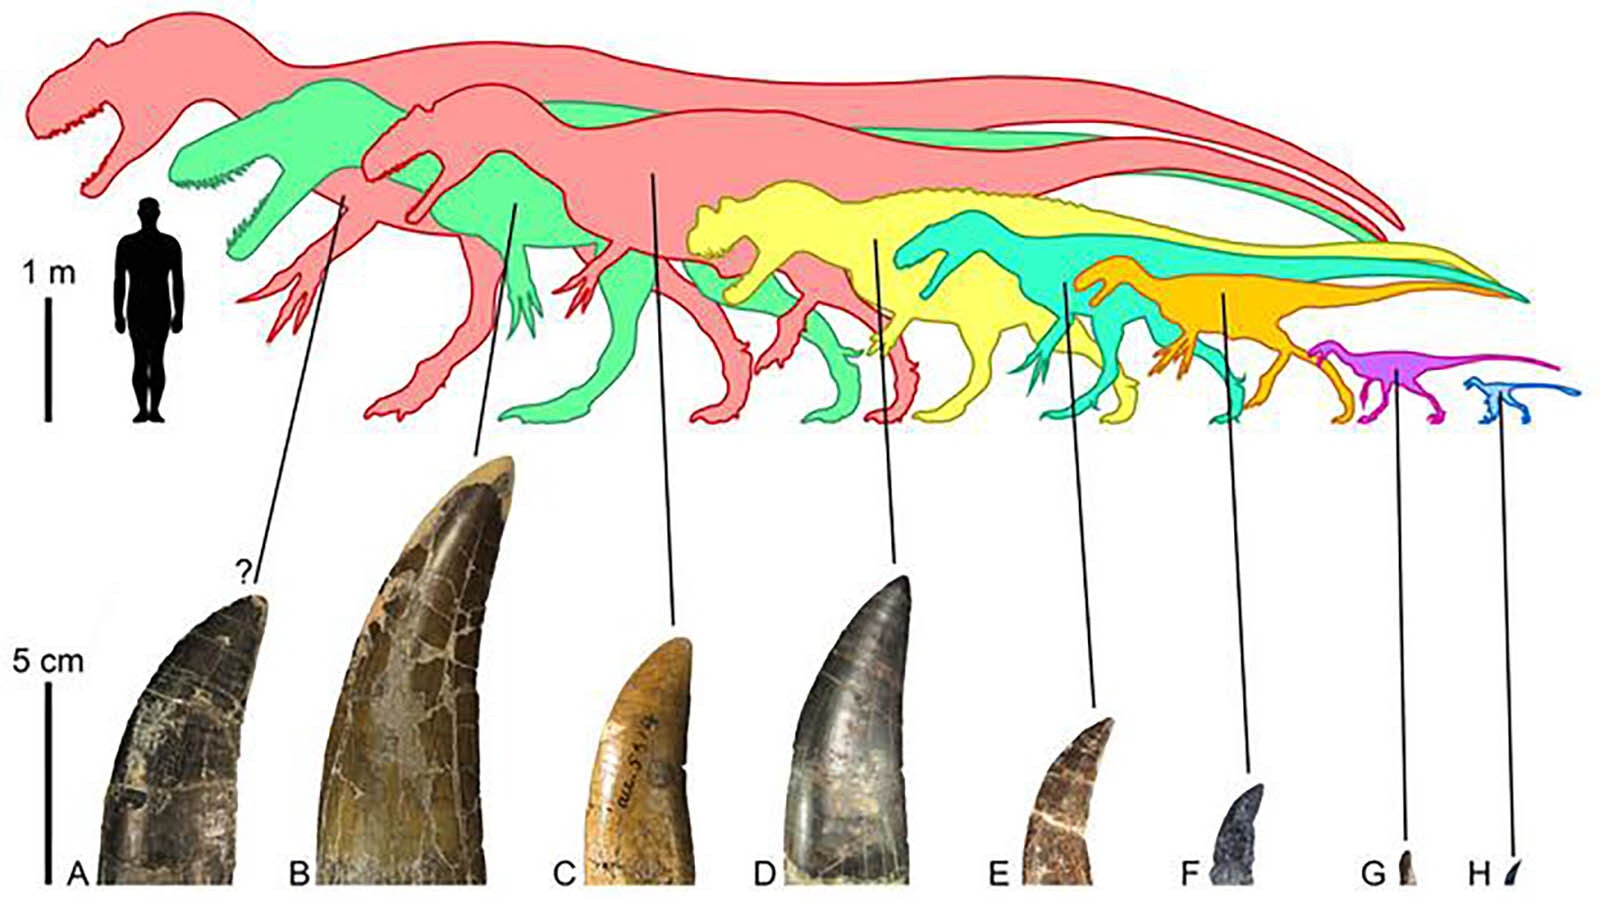 This diagram shows the tooth crowns of dinosaur theropods found in the Morrison Formation.